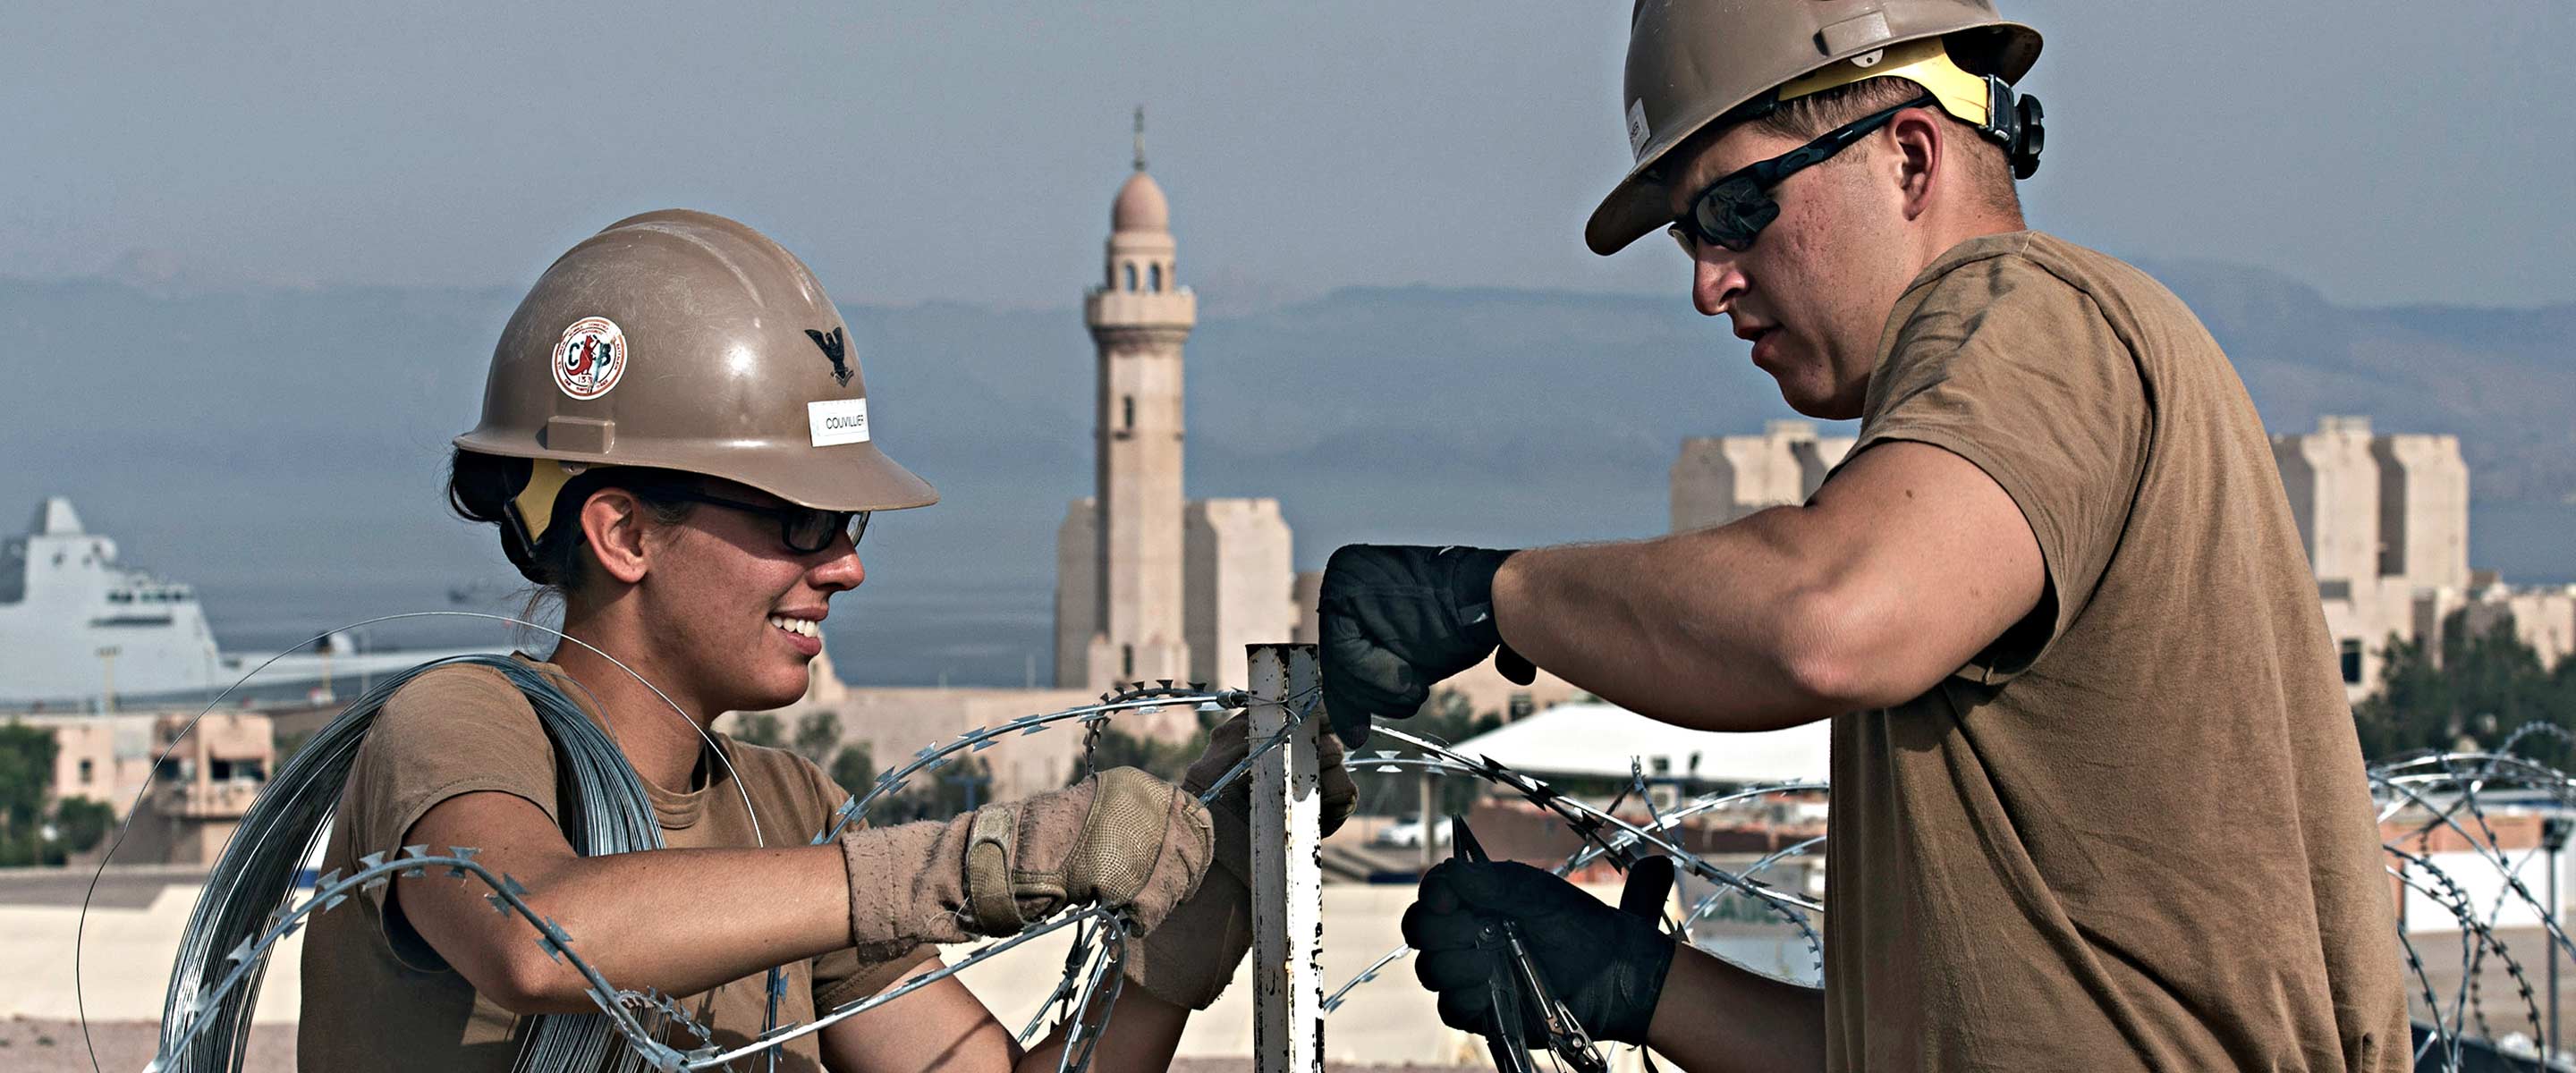 Two current Navy Civil Engineers repairing a fence